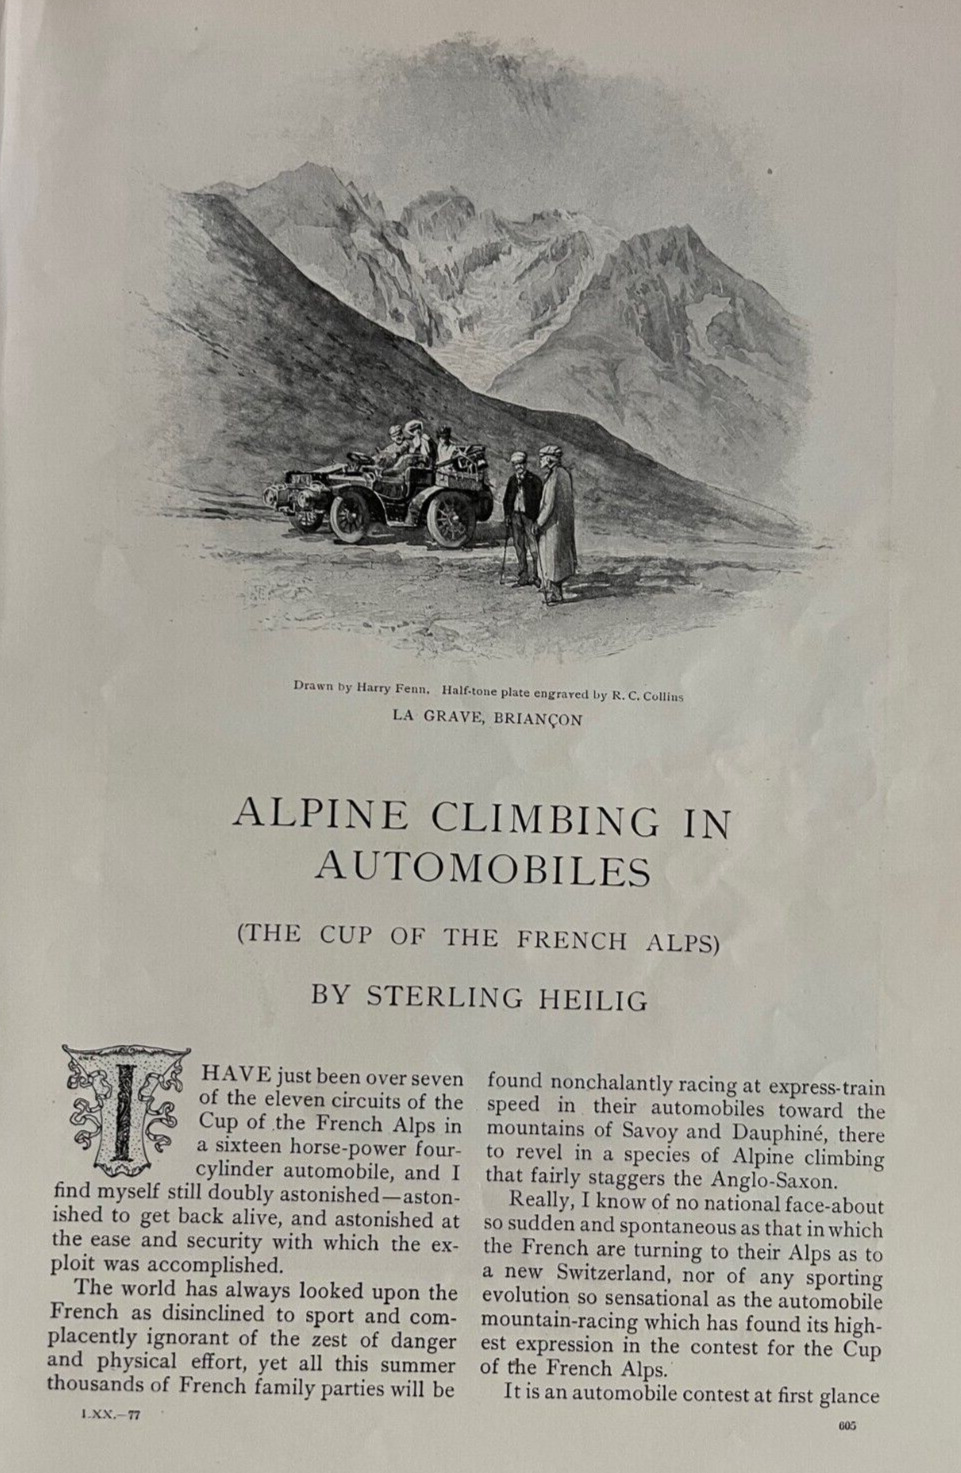 1905 Automobiles in the French Alps illustrated